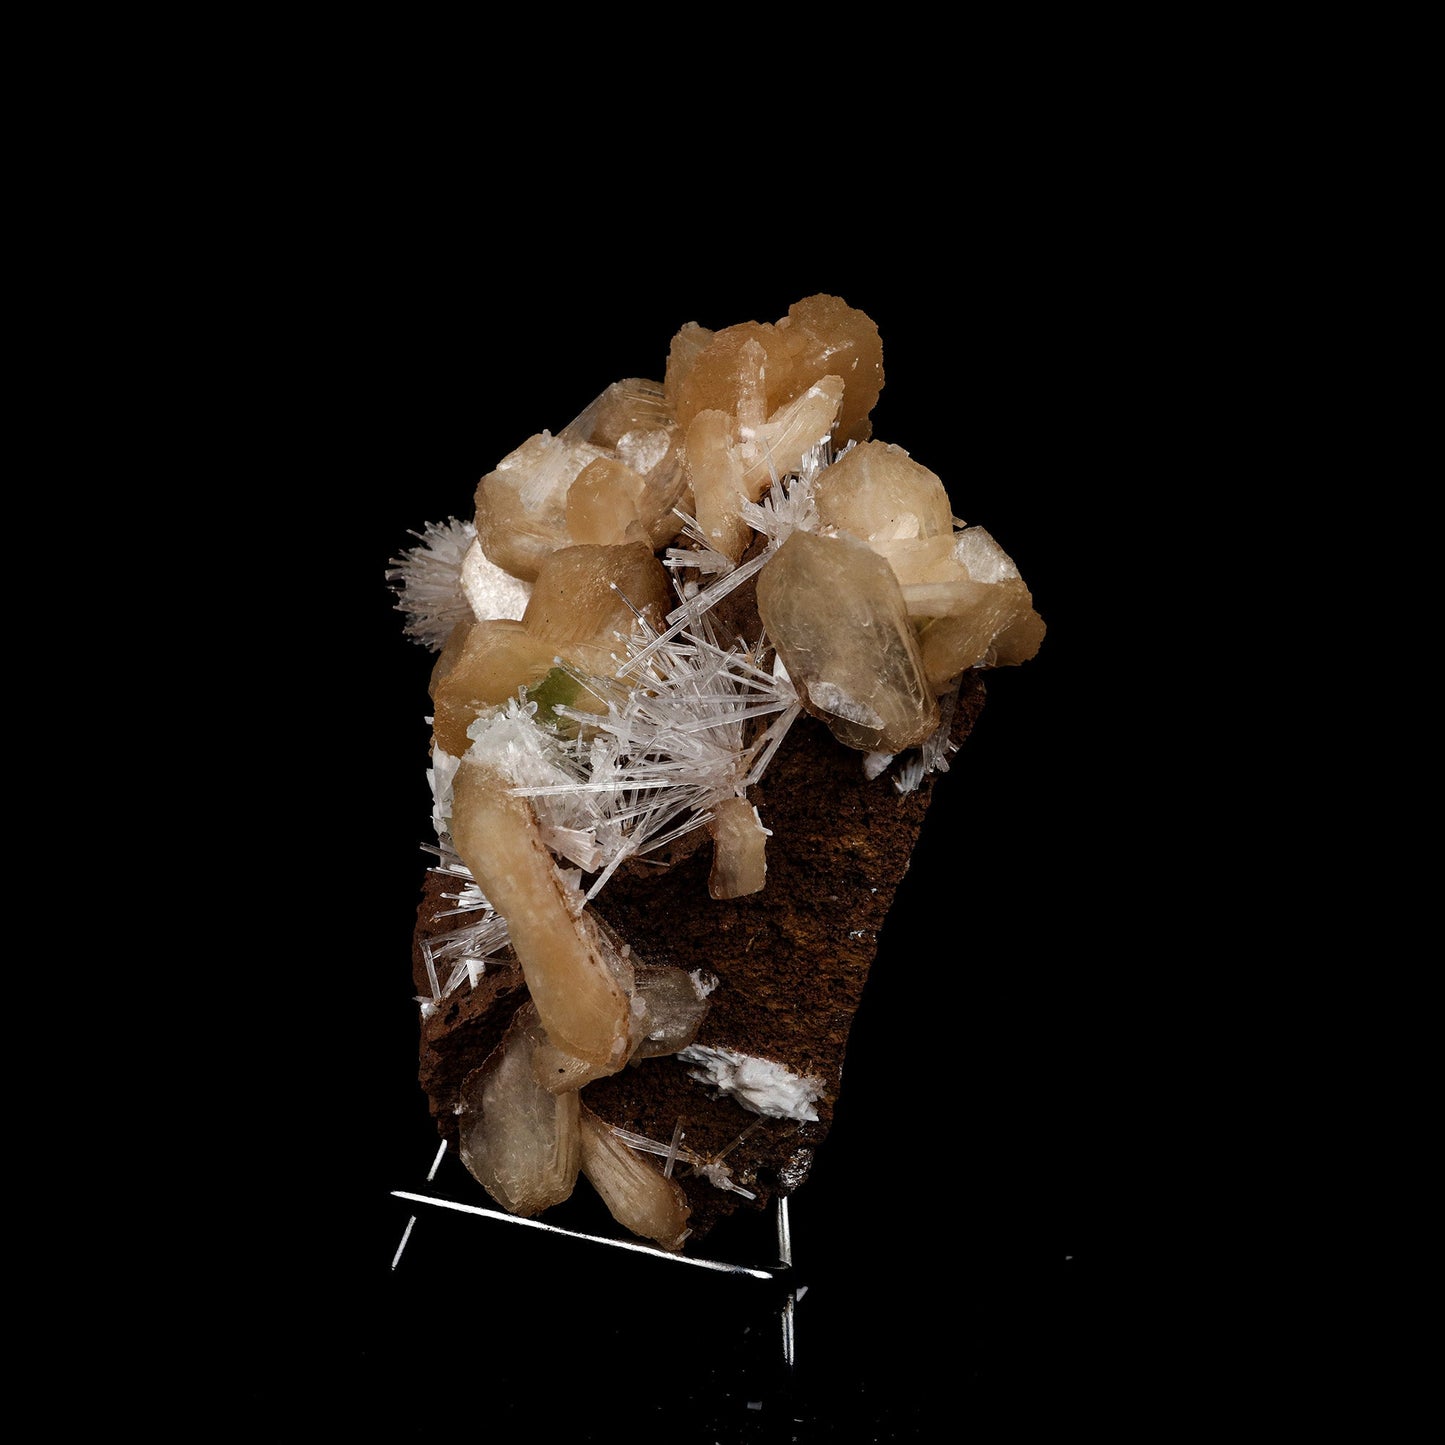 Stilbite with Scolecite Sprays Natural Mineral Specimen # B 5274  https://www.superbminerals.us/products/stilbite-with-scolecite-sprays-natural-mineral-specimen-b-5274  Features: This specimen features a large, radial formation of colorless, transparent, lustrous acicular Scolecite crystals on peach-colored Stilbite. Primary Mineral(s): Scolecite Secondary Mineral(s): StilbiteMatrix: N/A 7 Inch x 6 InchWeight : 955 GmsLocality: Jalgaon, Maharashtra, India Year of Discovery: 2021